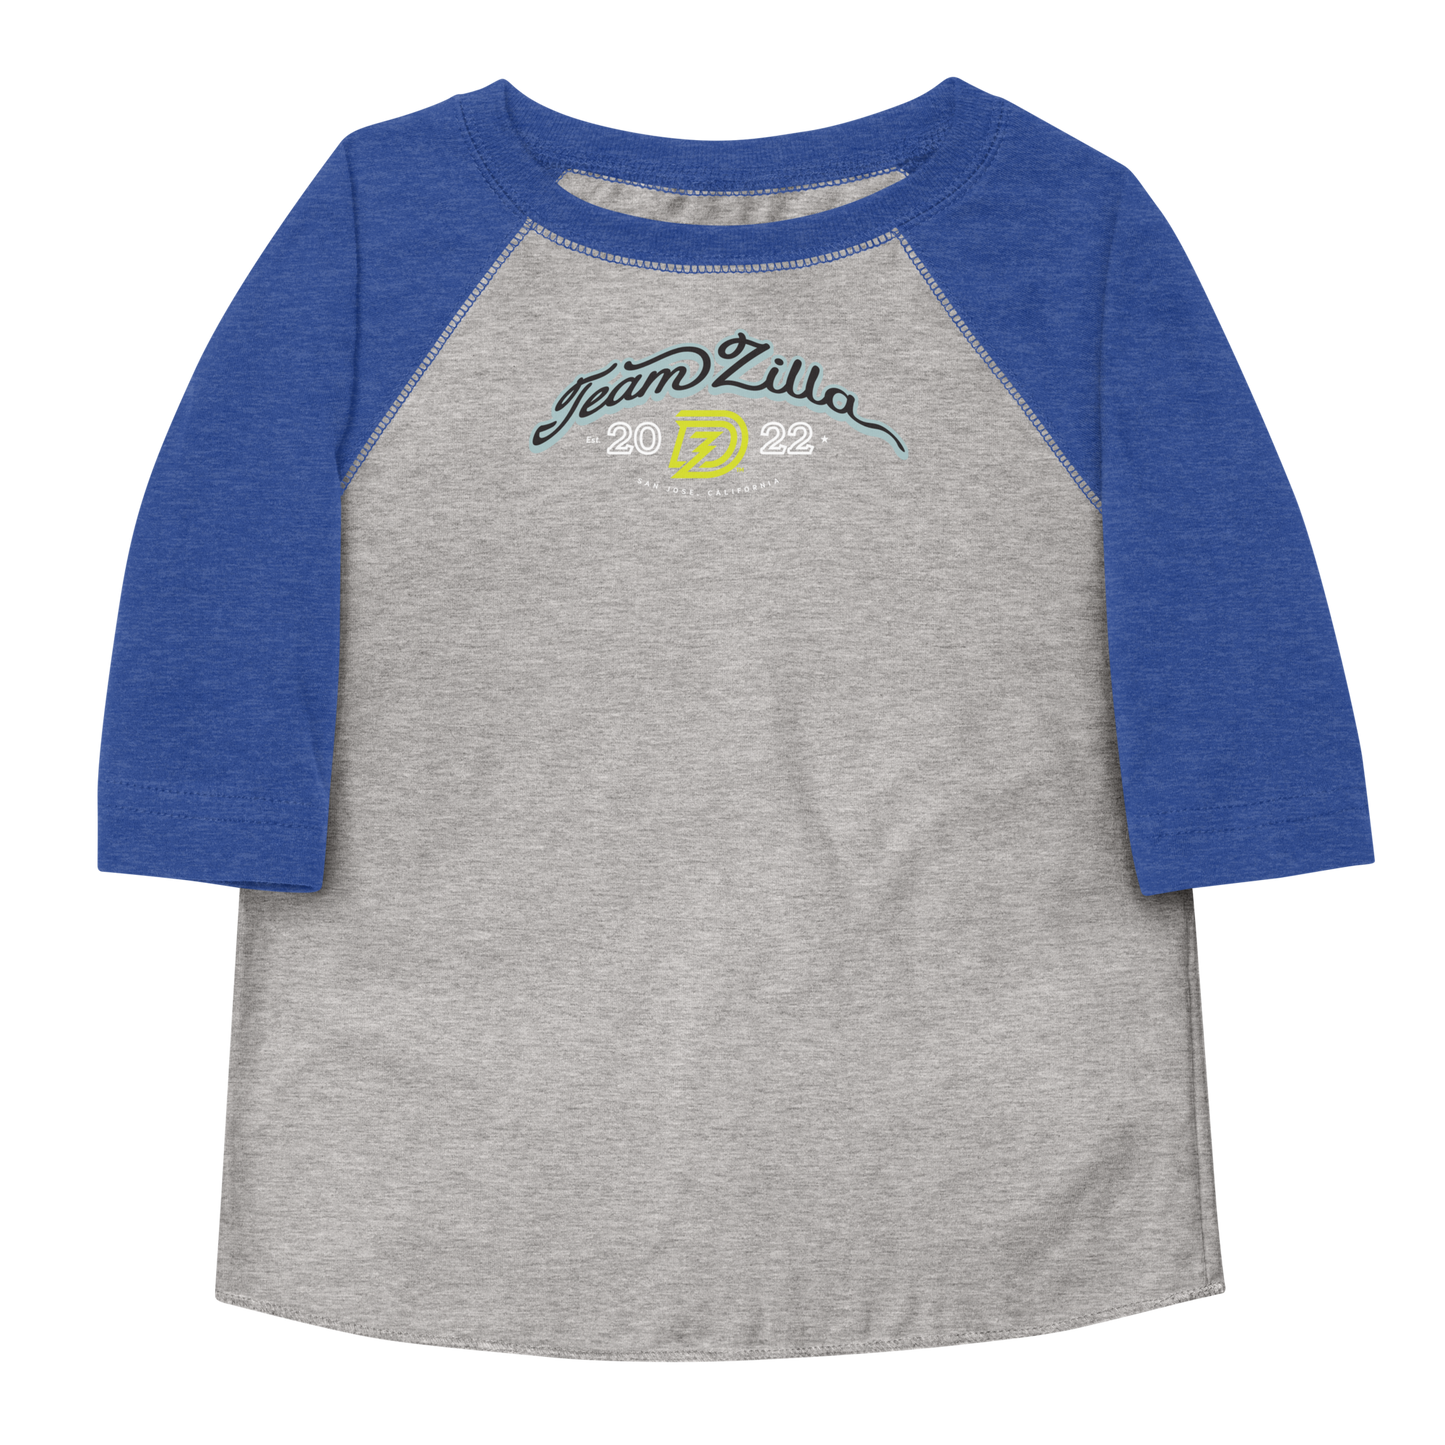 Team Zilla 2022 Toddler Shirt in Vintage Heather with Vintage Royal Sleeves